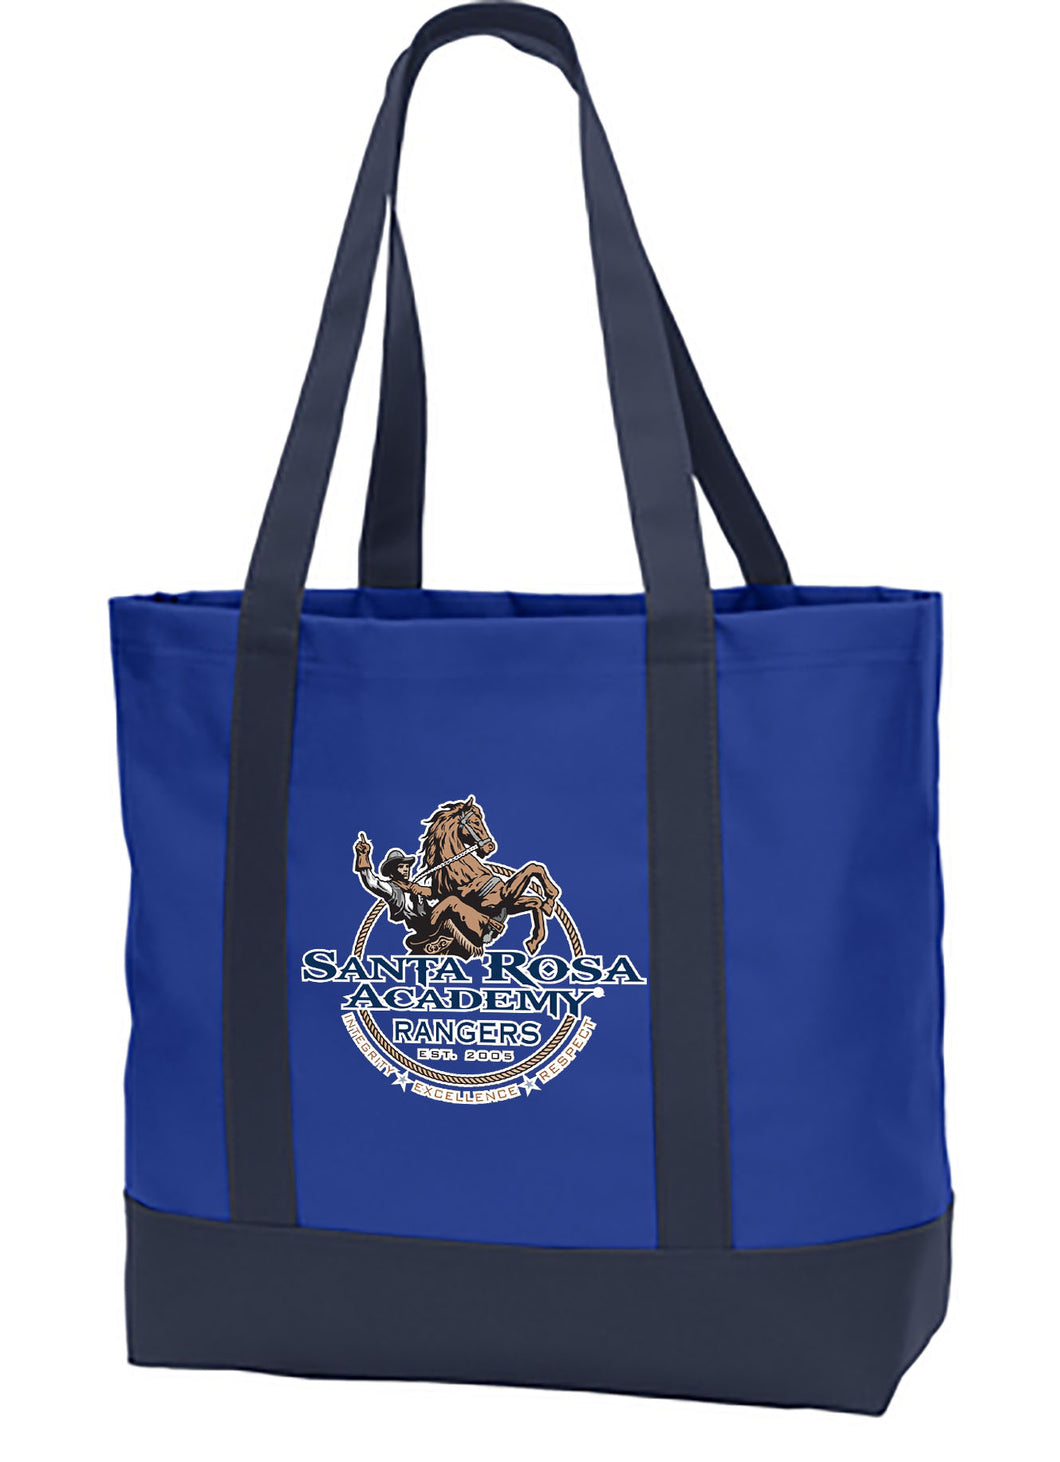 Back to School Tote Bag Special - ACBG406